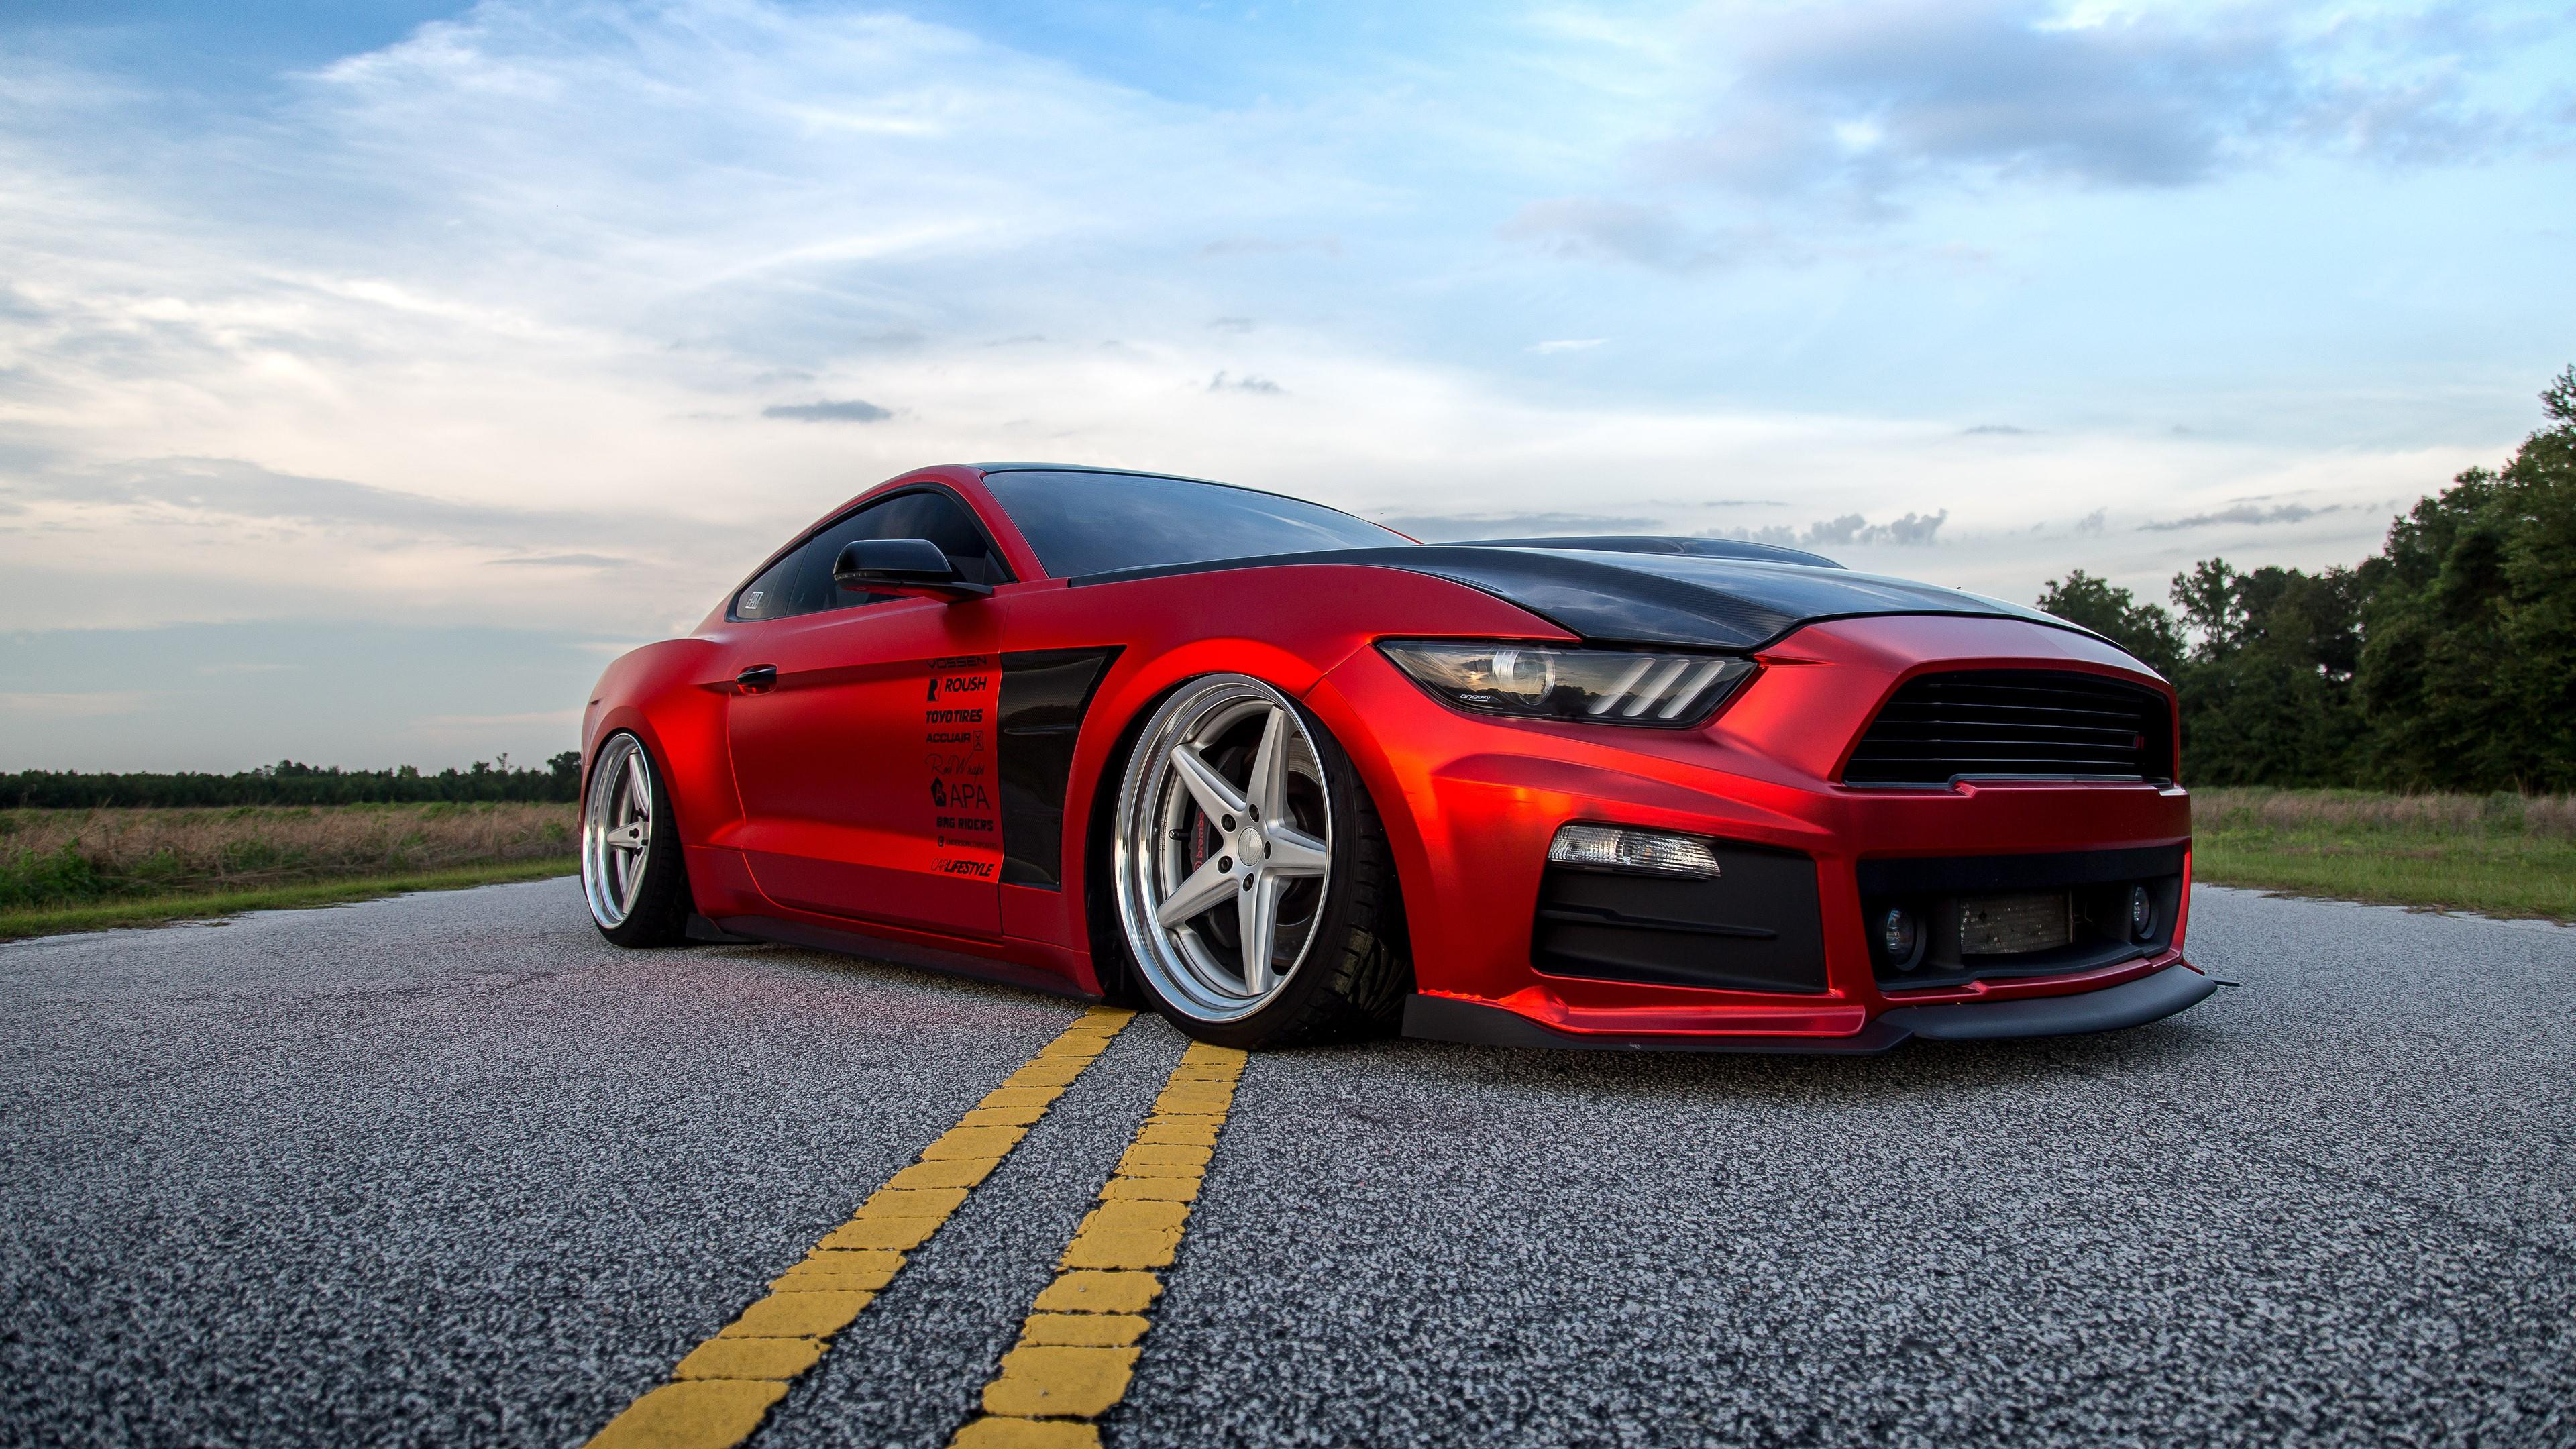 Ford Mustang GT wallpaper - backiee